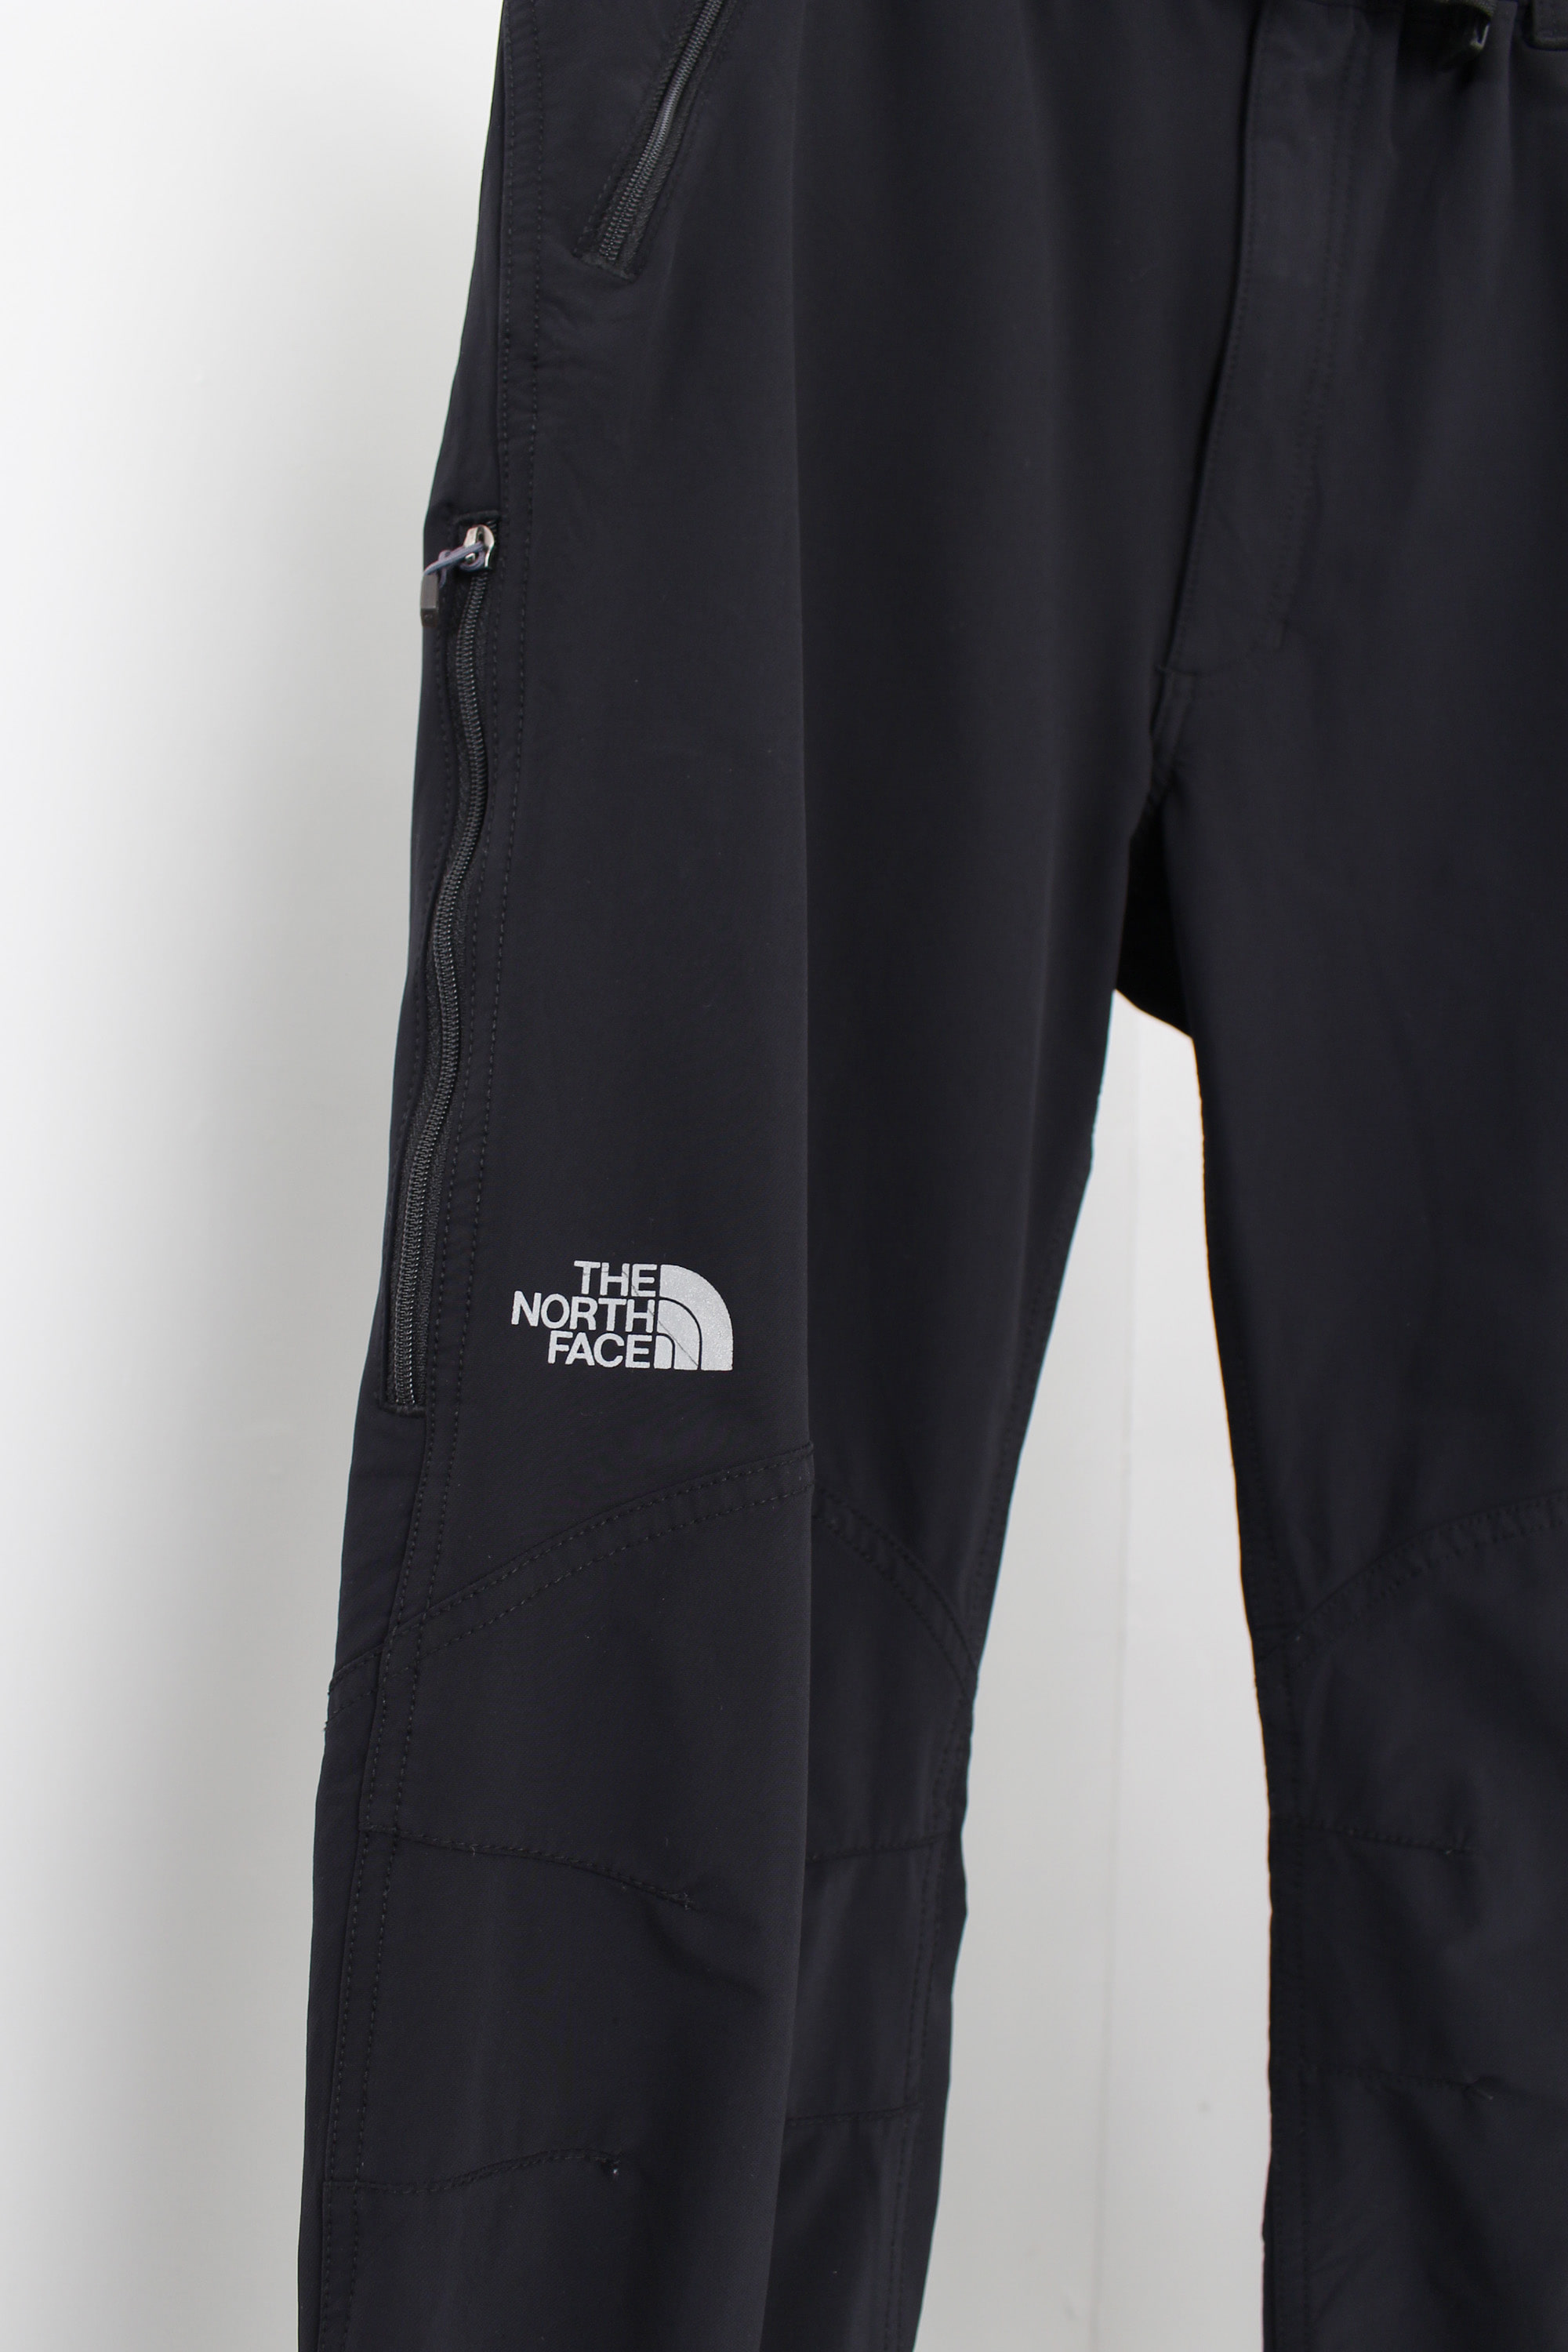 THE NORTH FACE hiking pants